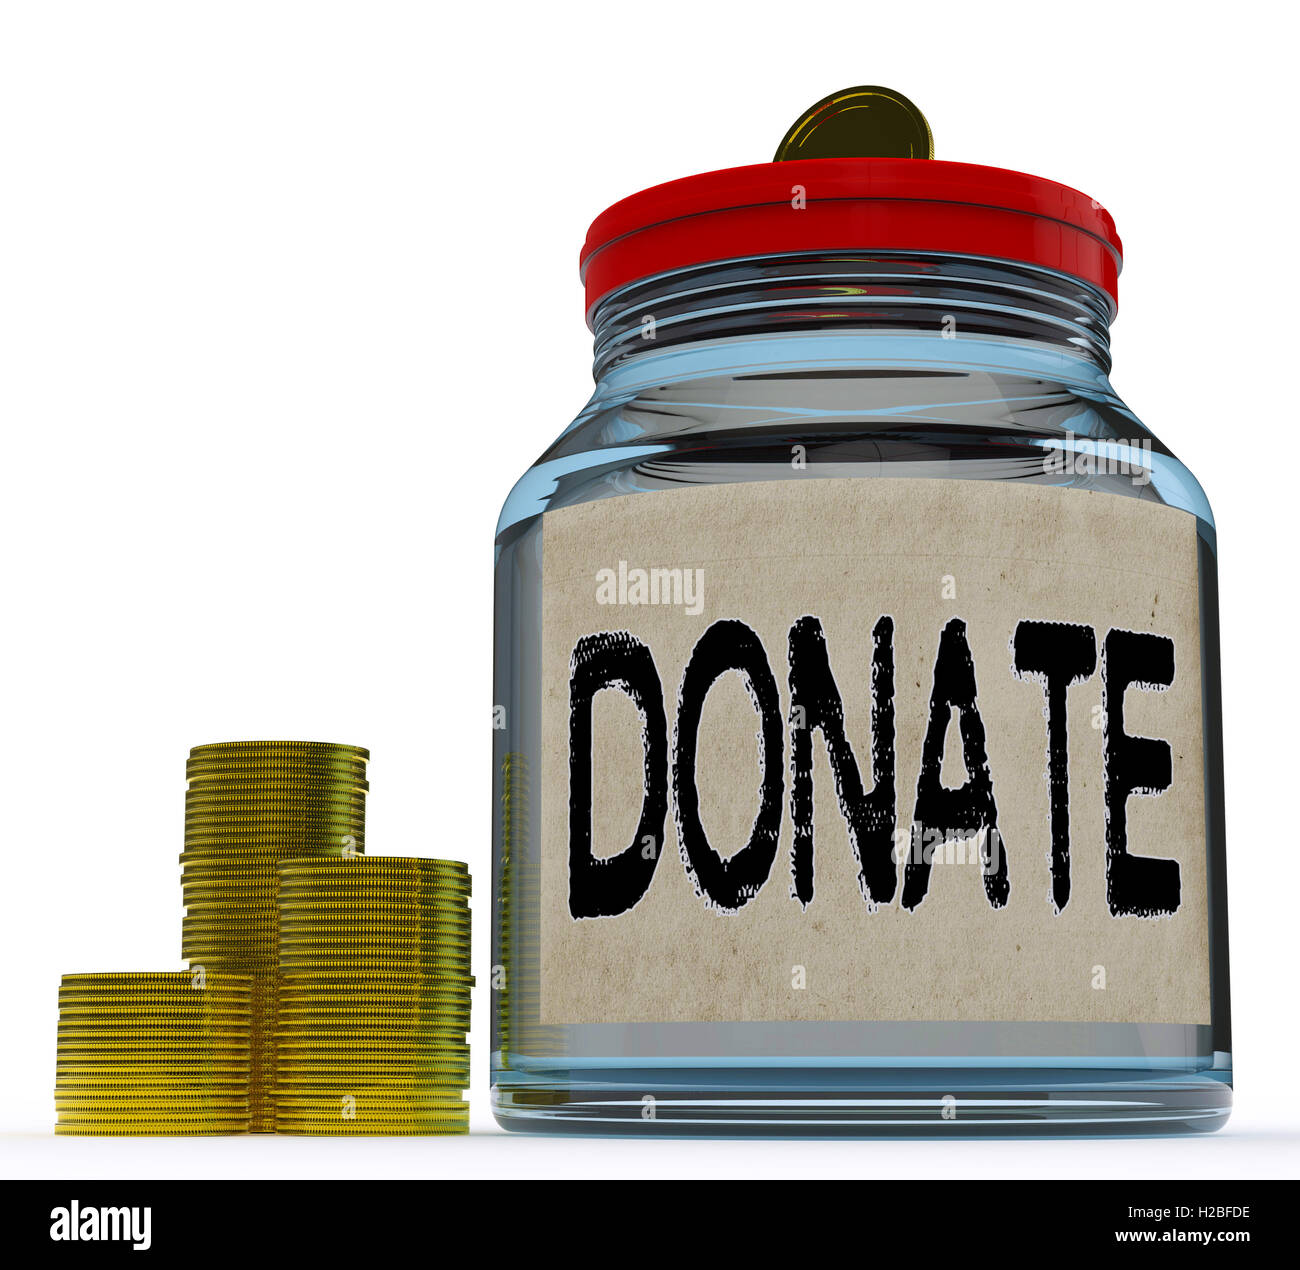 Donate Jar Shows Fundraising Charity And Contributions Stock Photo